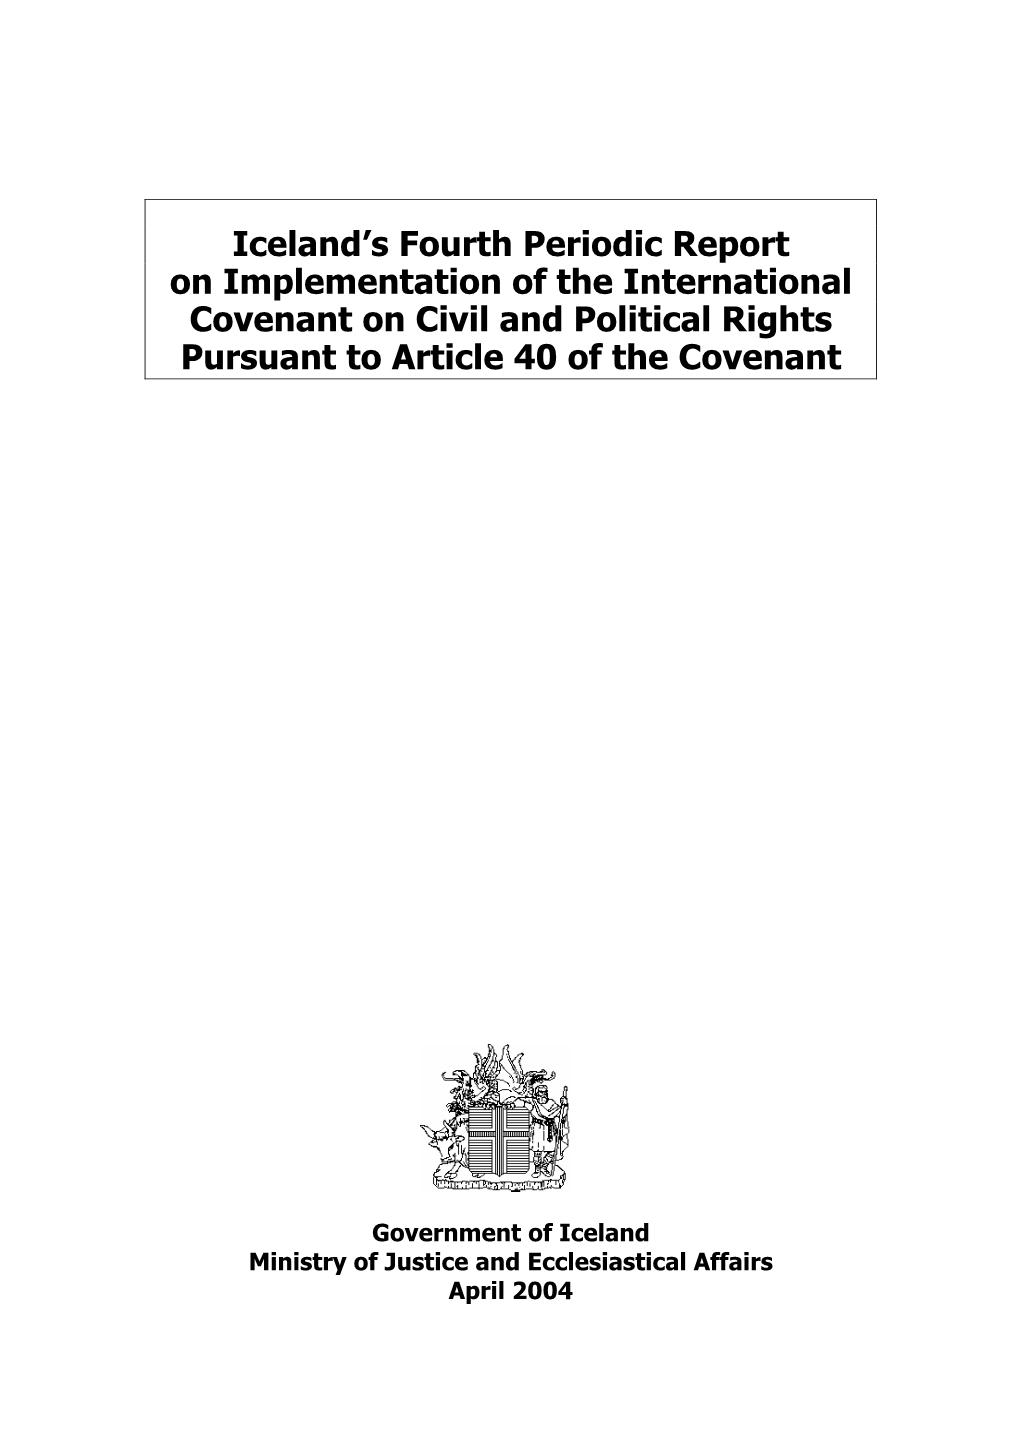 Iceland's Fourth Periodic Report on Implementation of the International